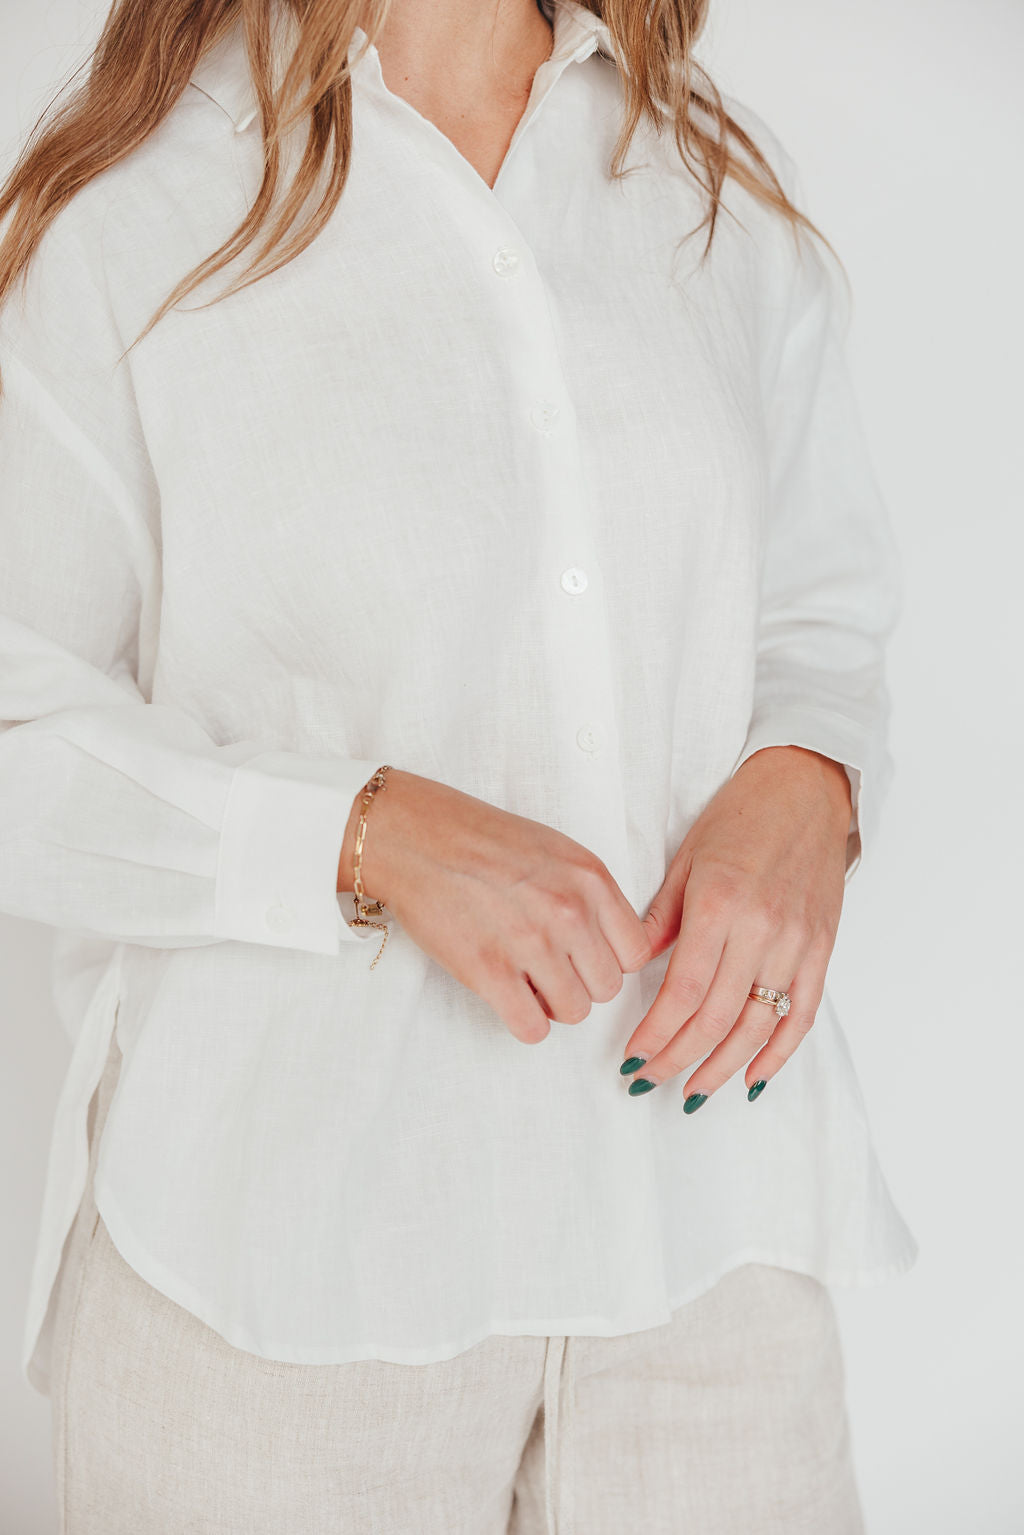 The Evelyn 100% Linen Top in White